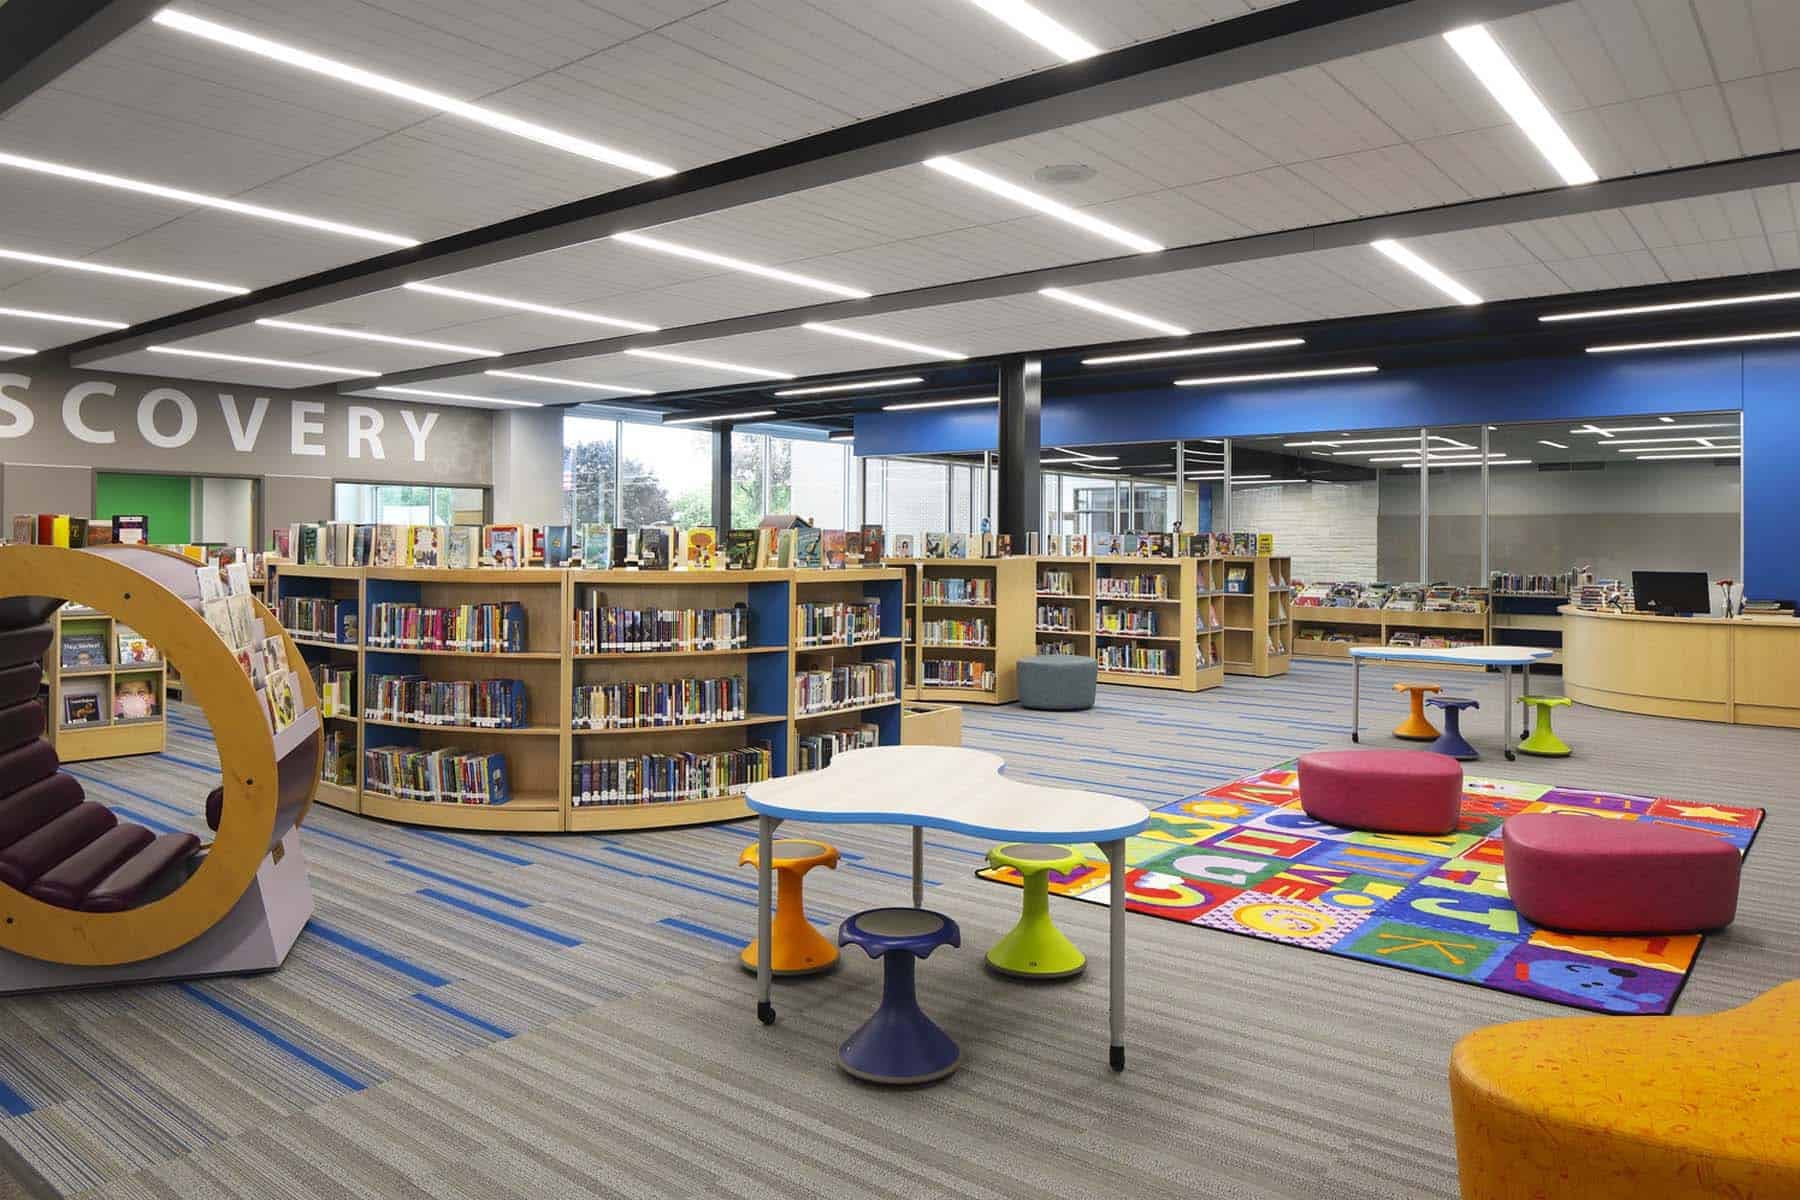 McKinley Elementary School in Wauwatosa School District Library and IMC